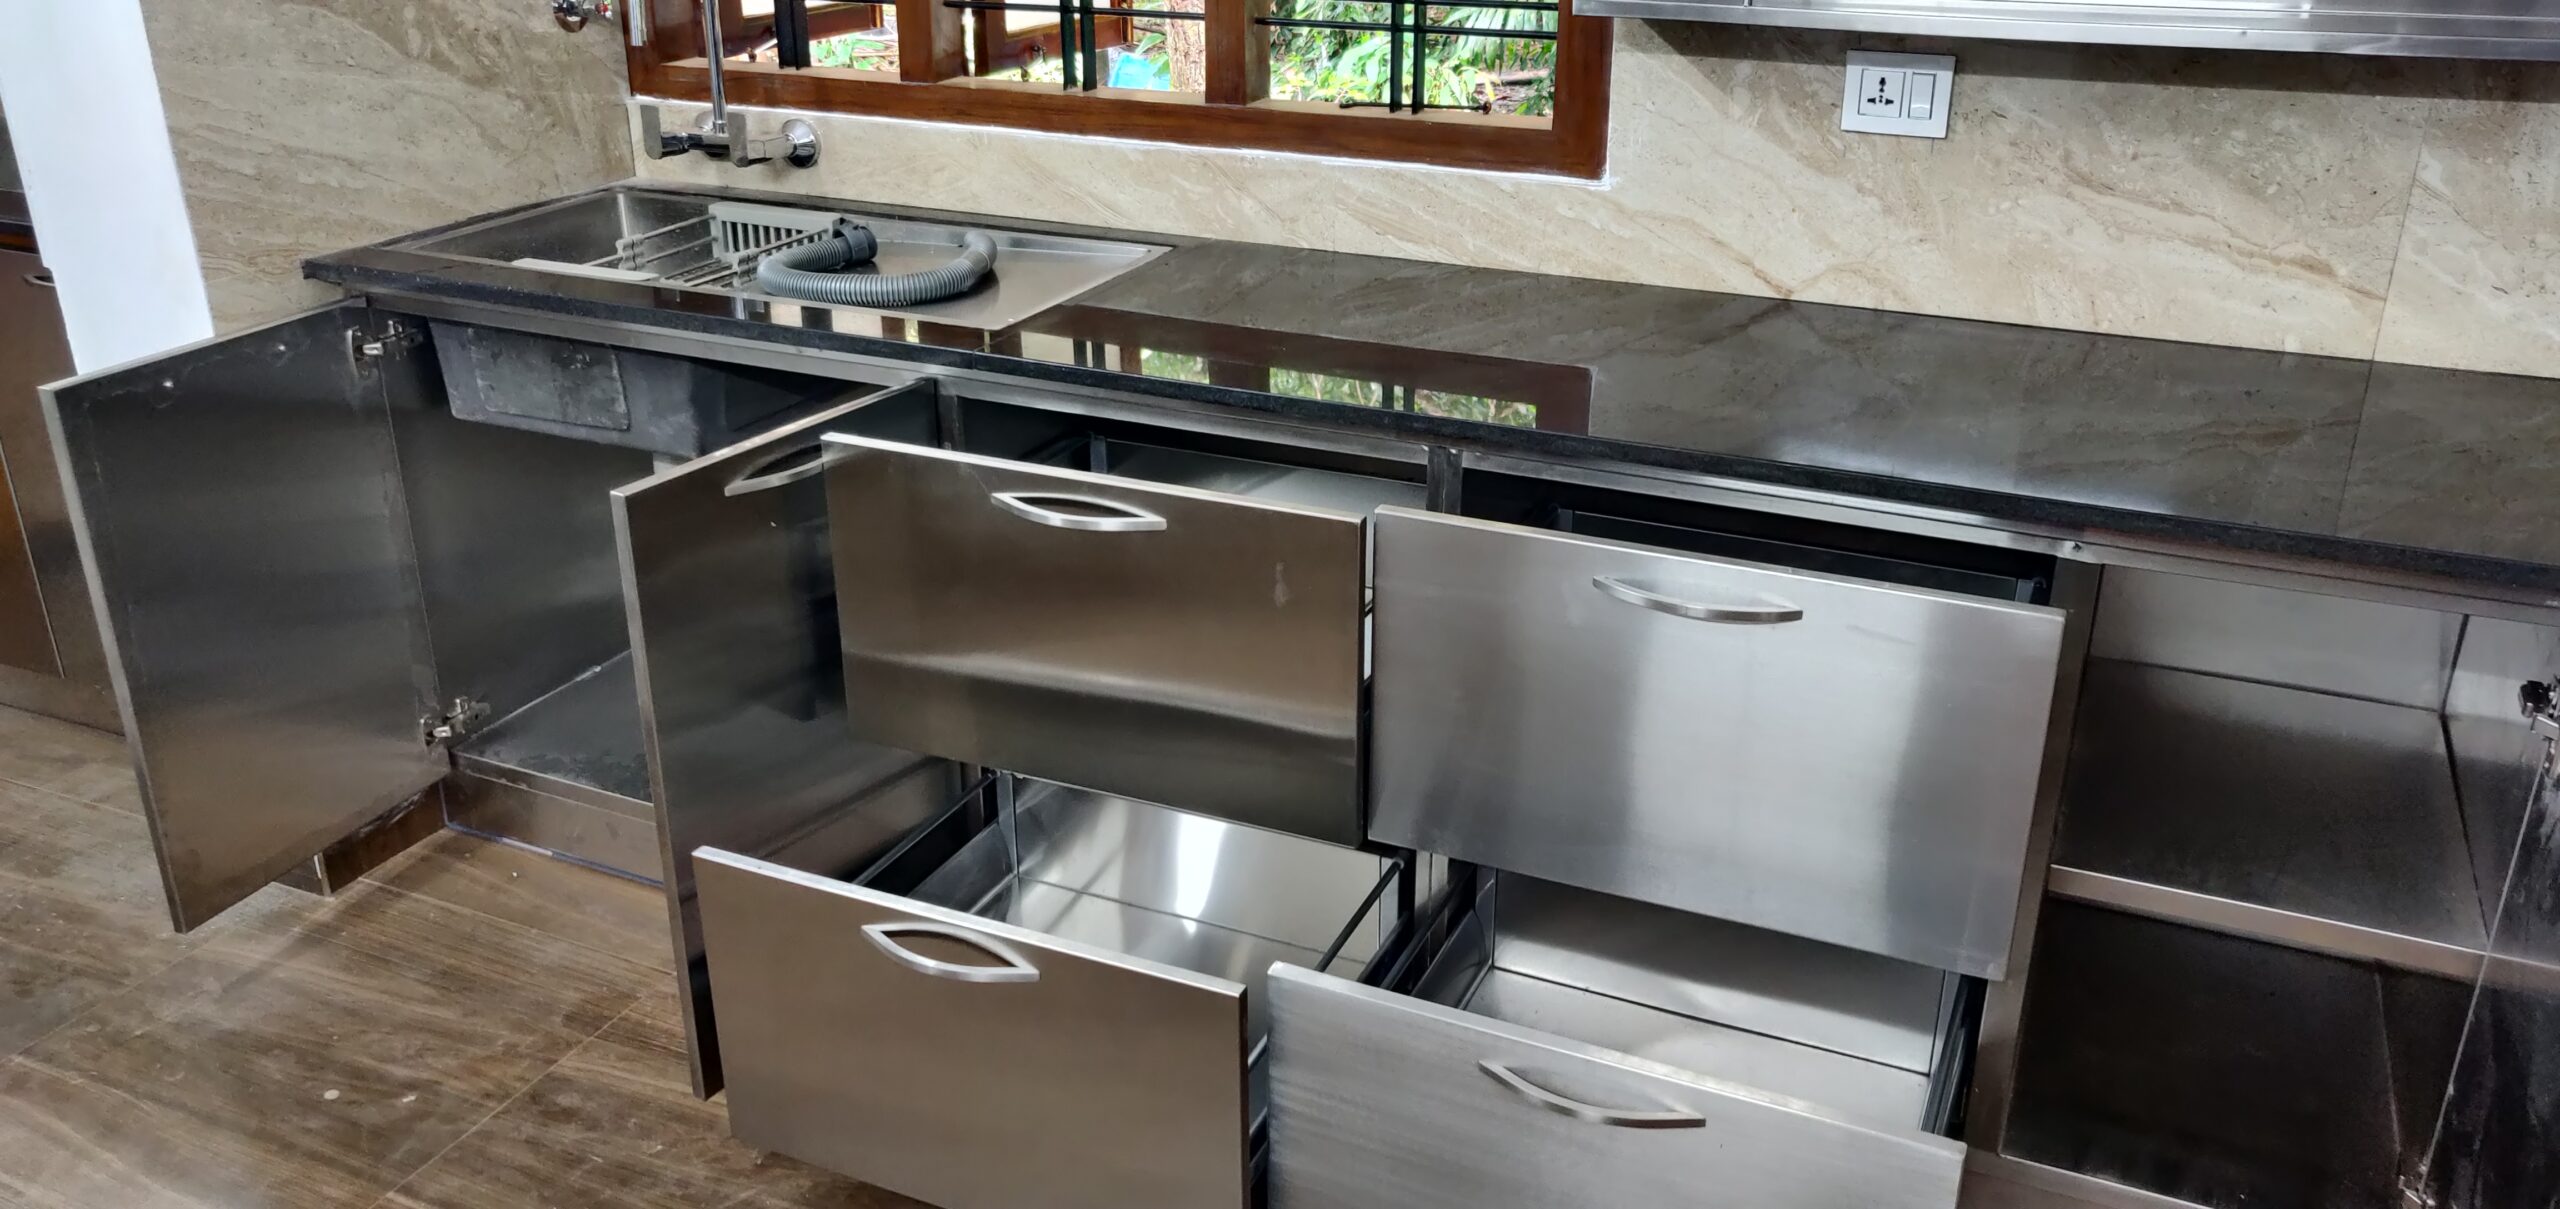 Drawers/Doors, all stainless steel for hygienic living